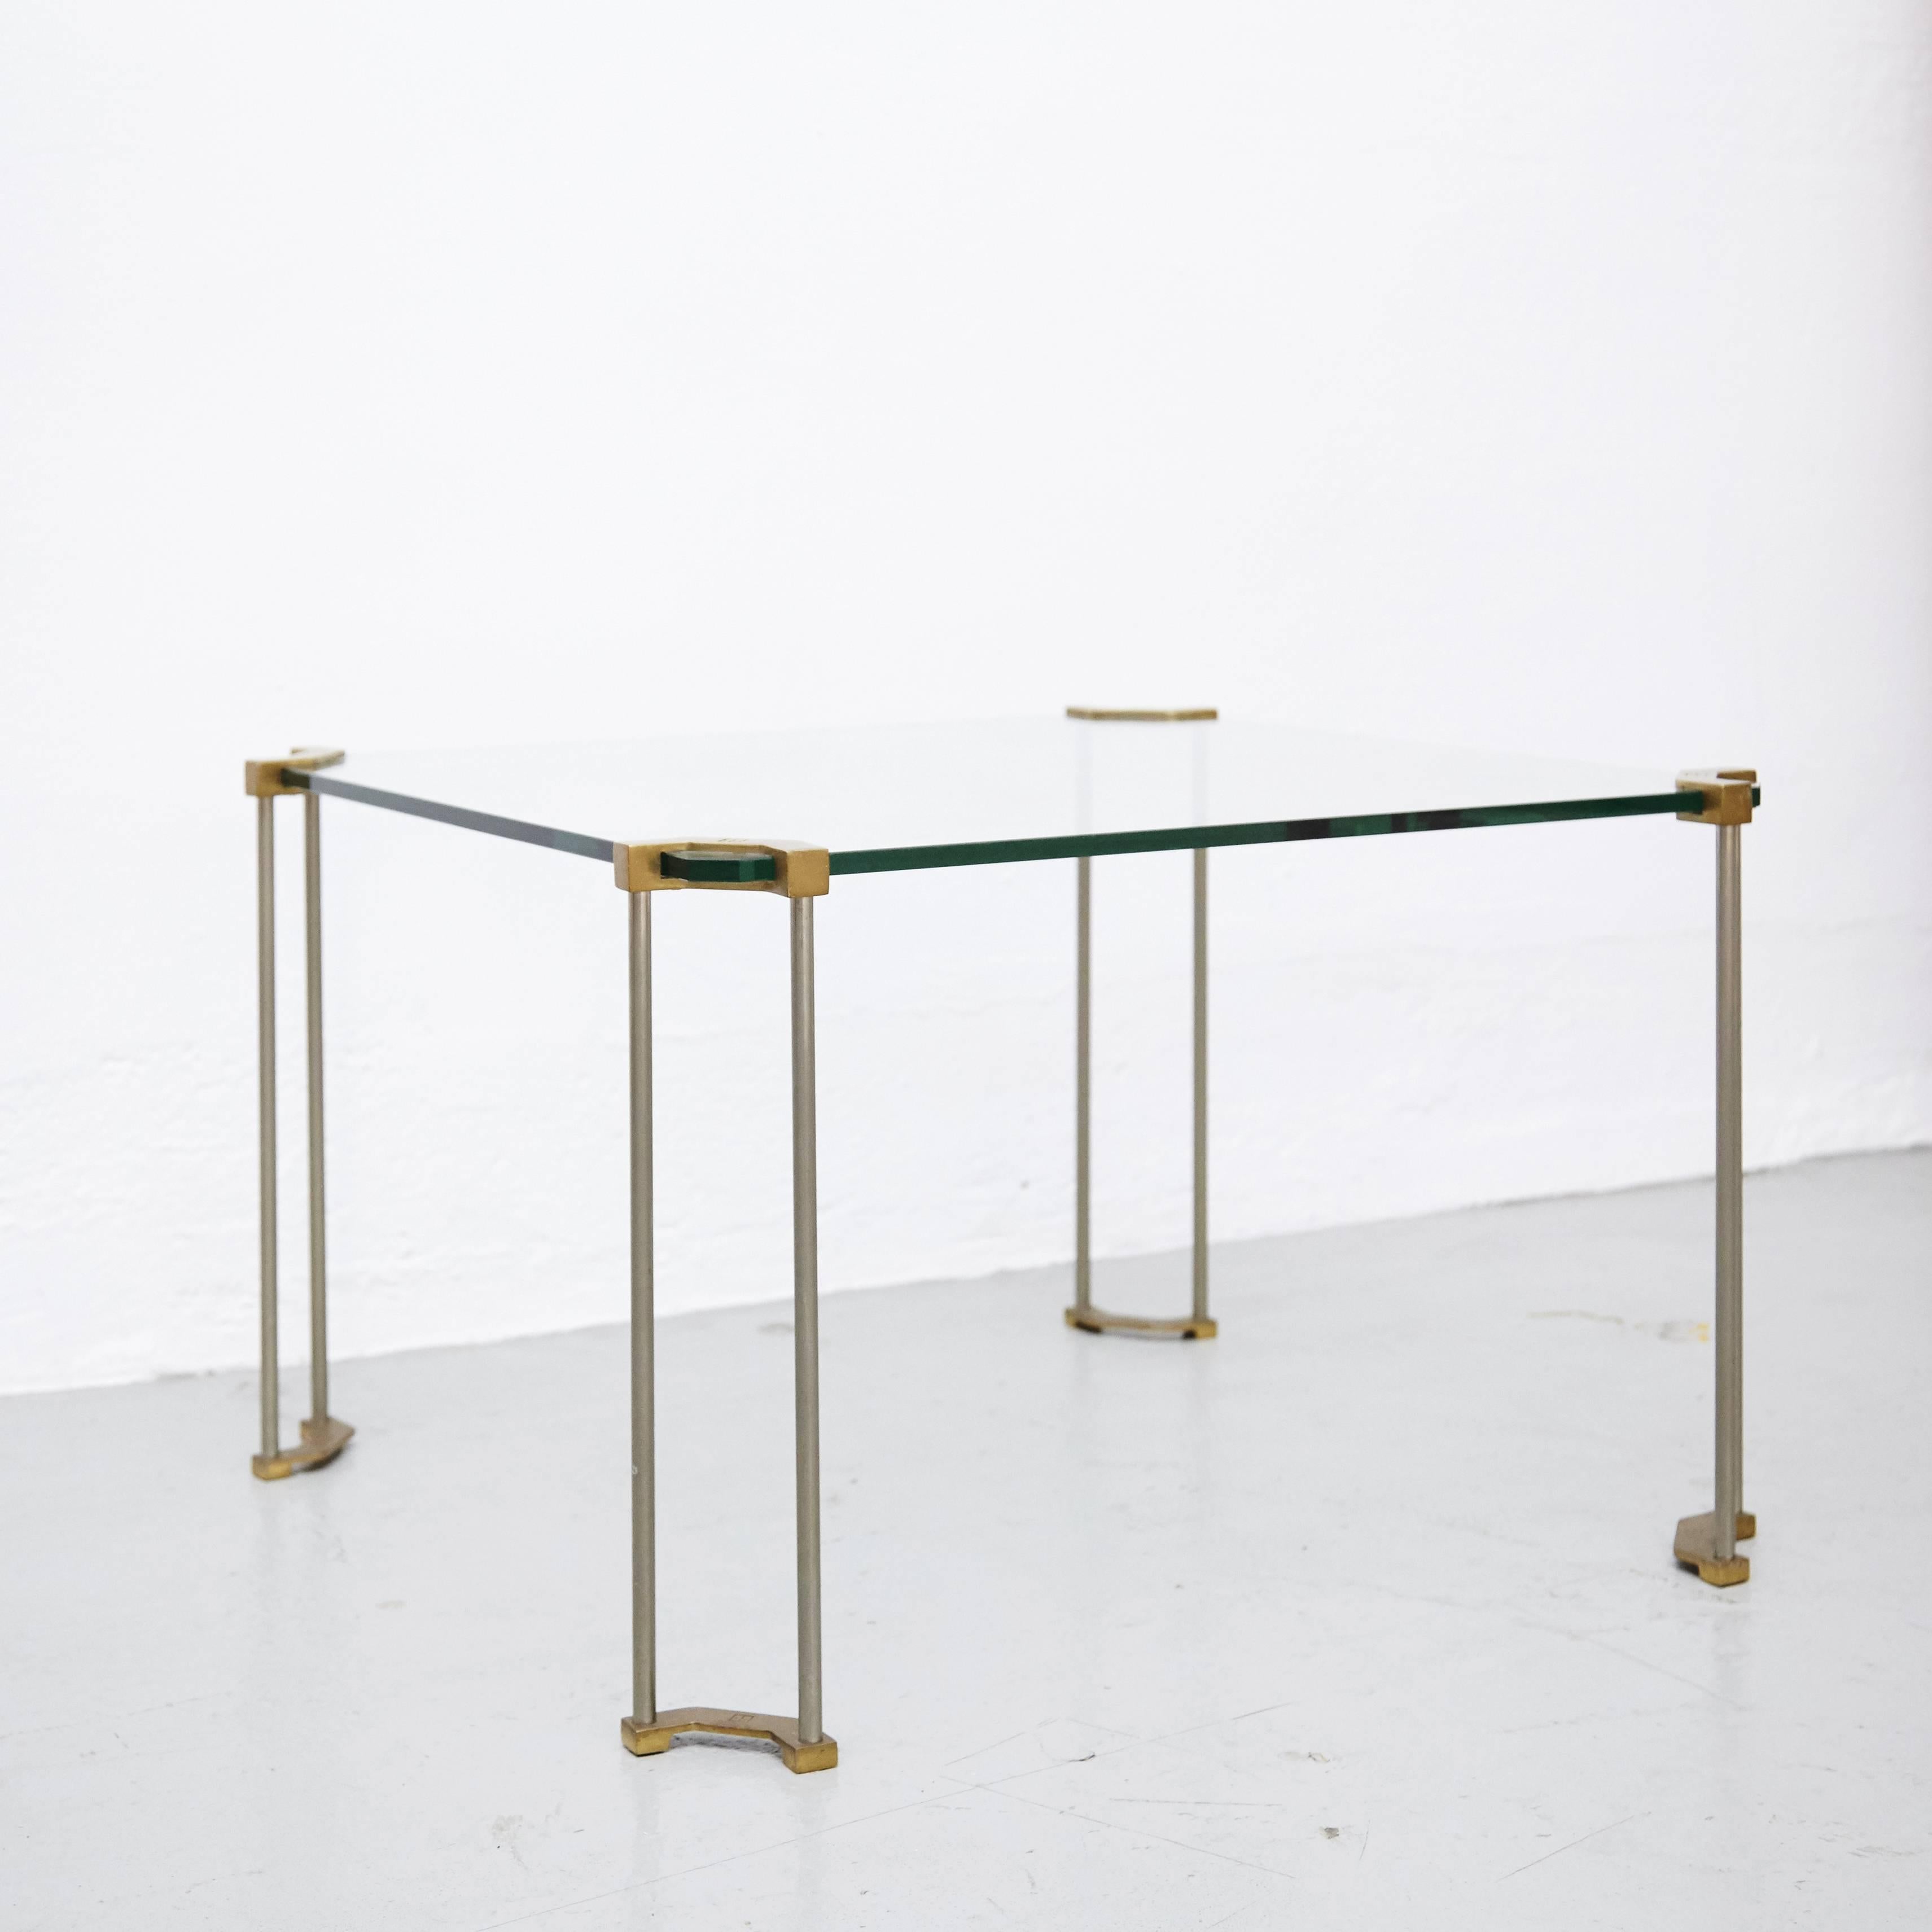 The table is made from glass and sand casted brass. The legs are hand casted by very skilled craftsmen in the Netherlands. The brass has typical characteristics of the casting process and only some parts are polished.

After the Hungarian revolution